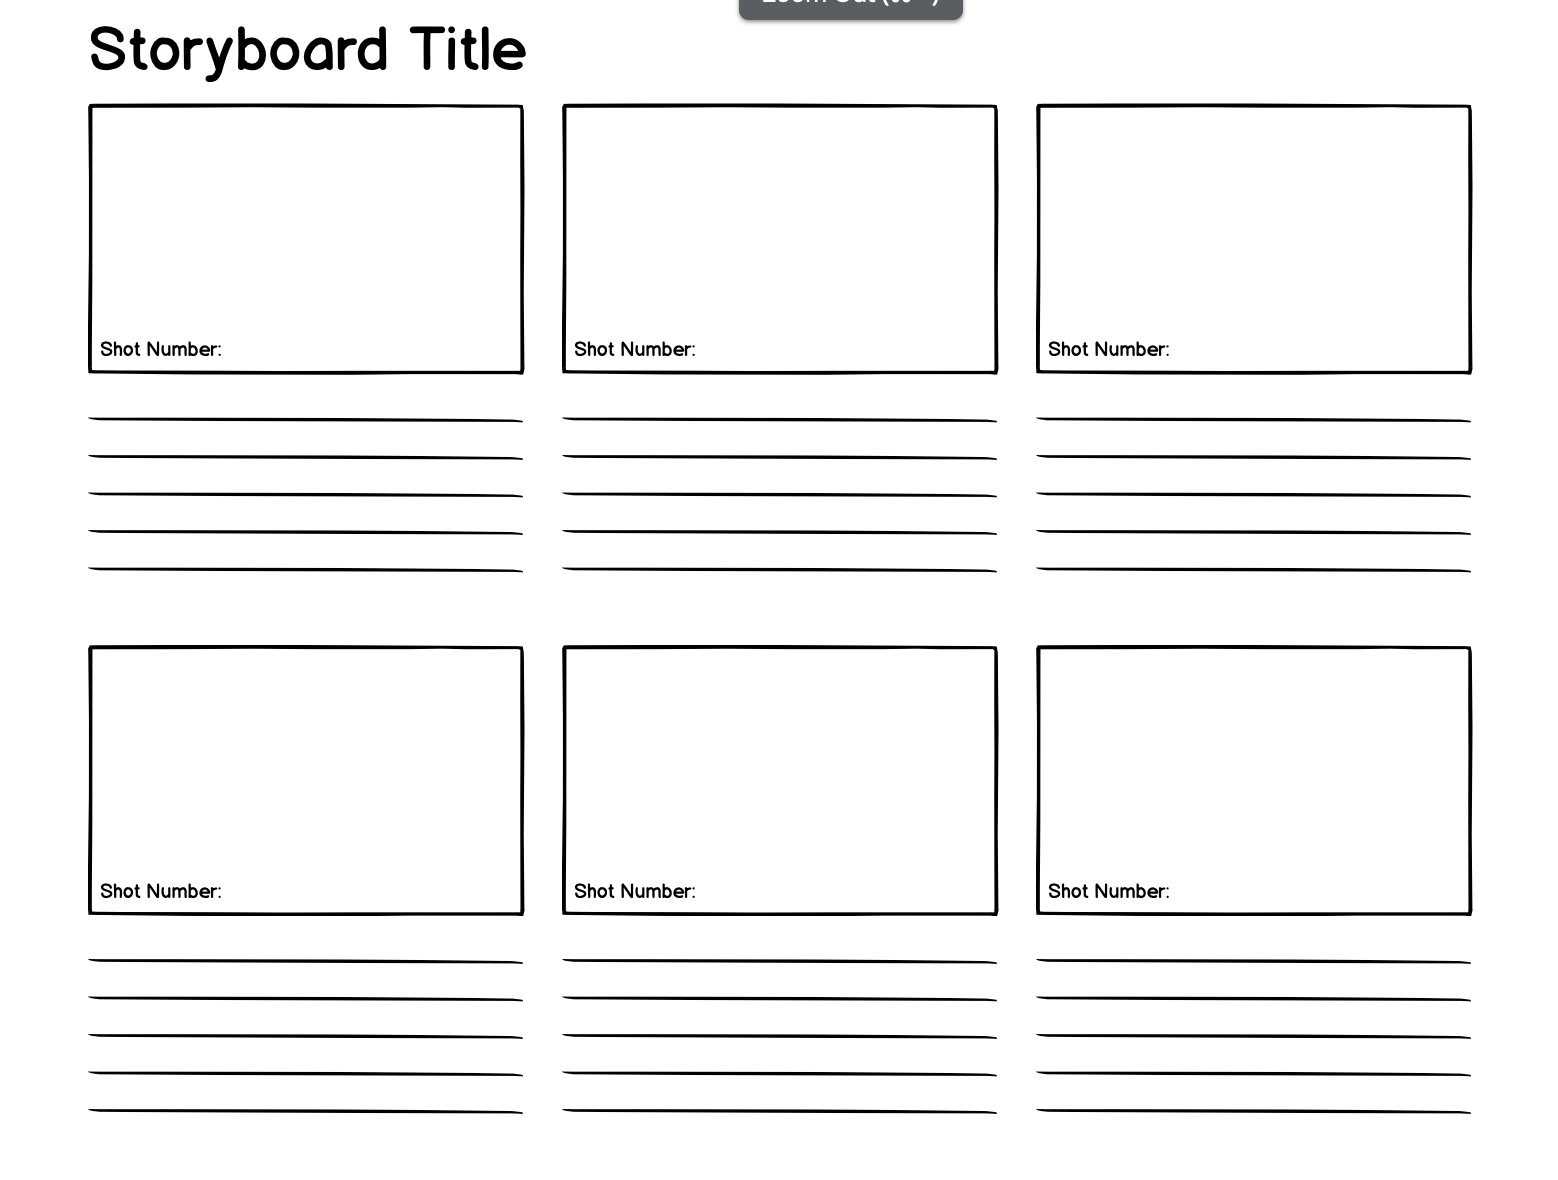 Why I create a Story Board at the start of almost every UI/UX